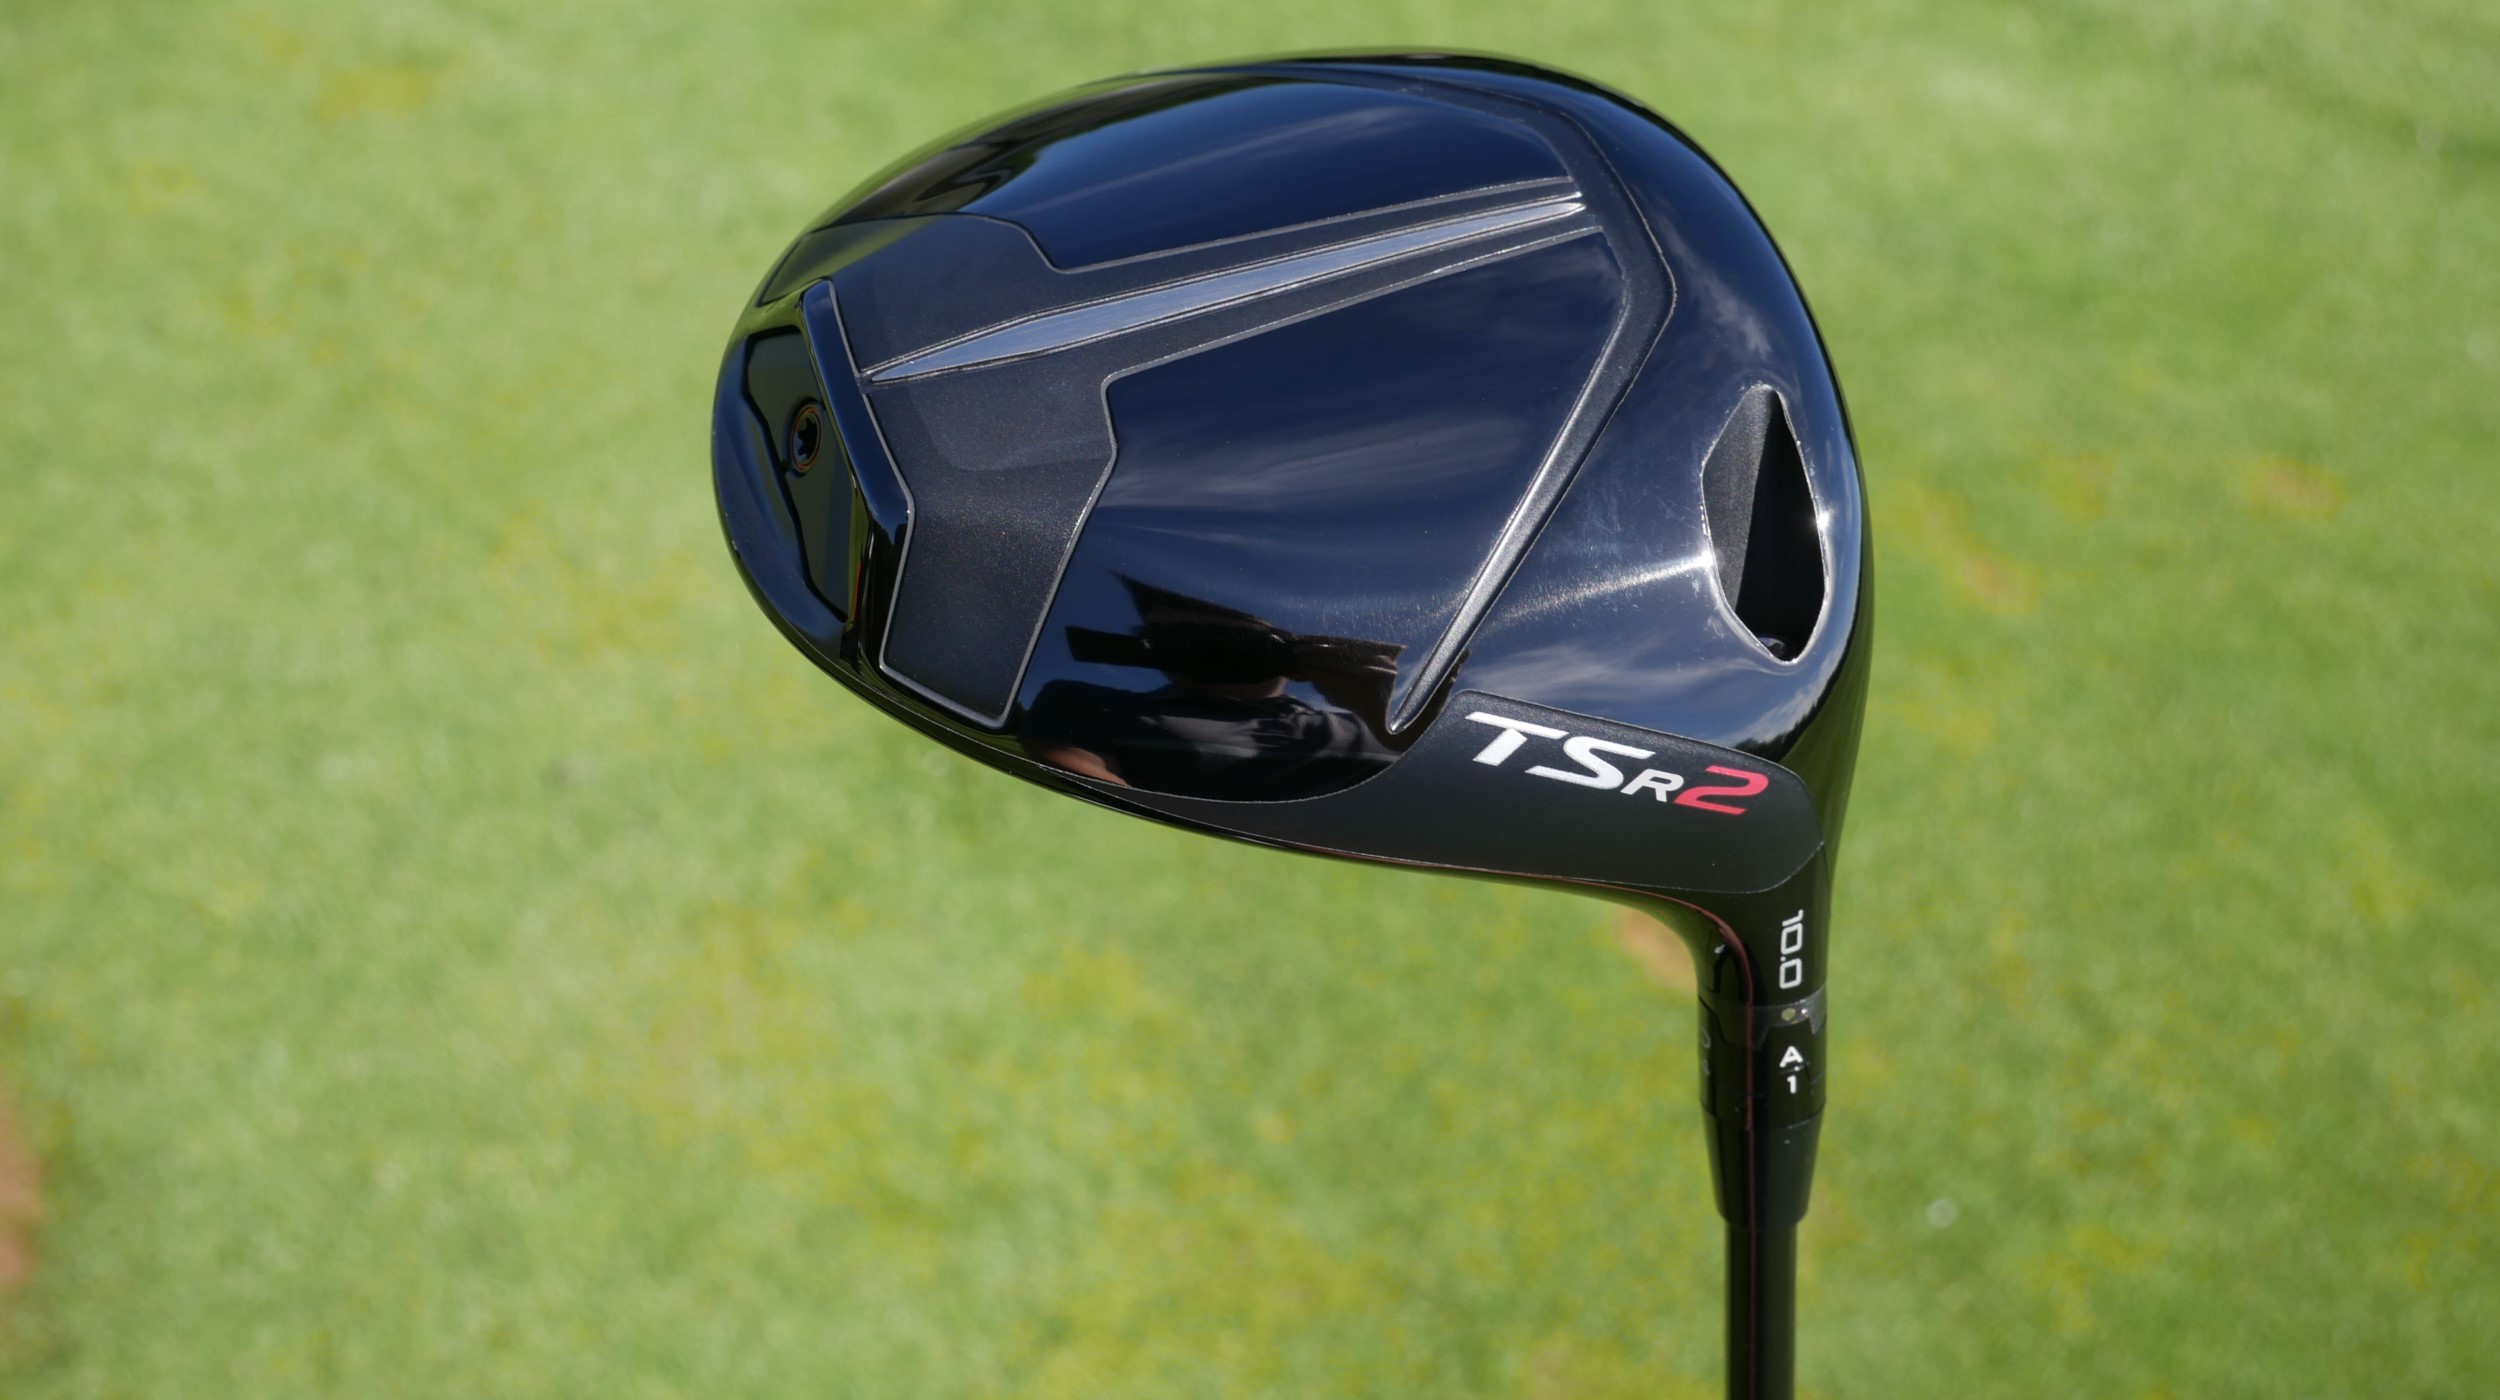 The Titleist TS2 Driver